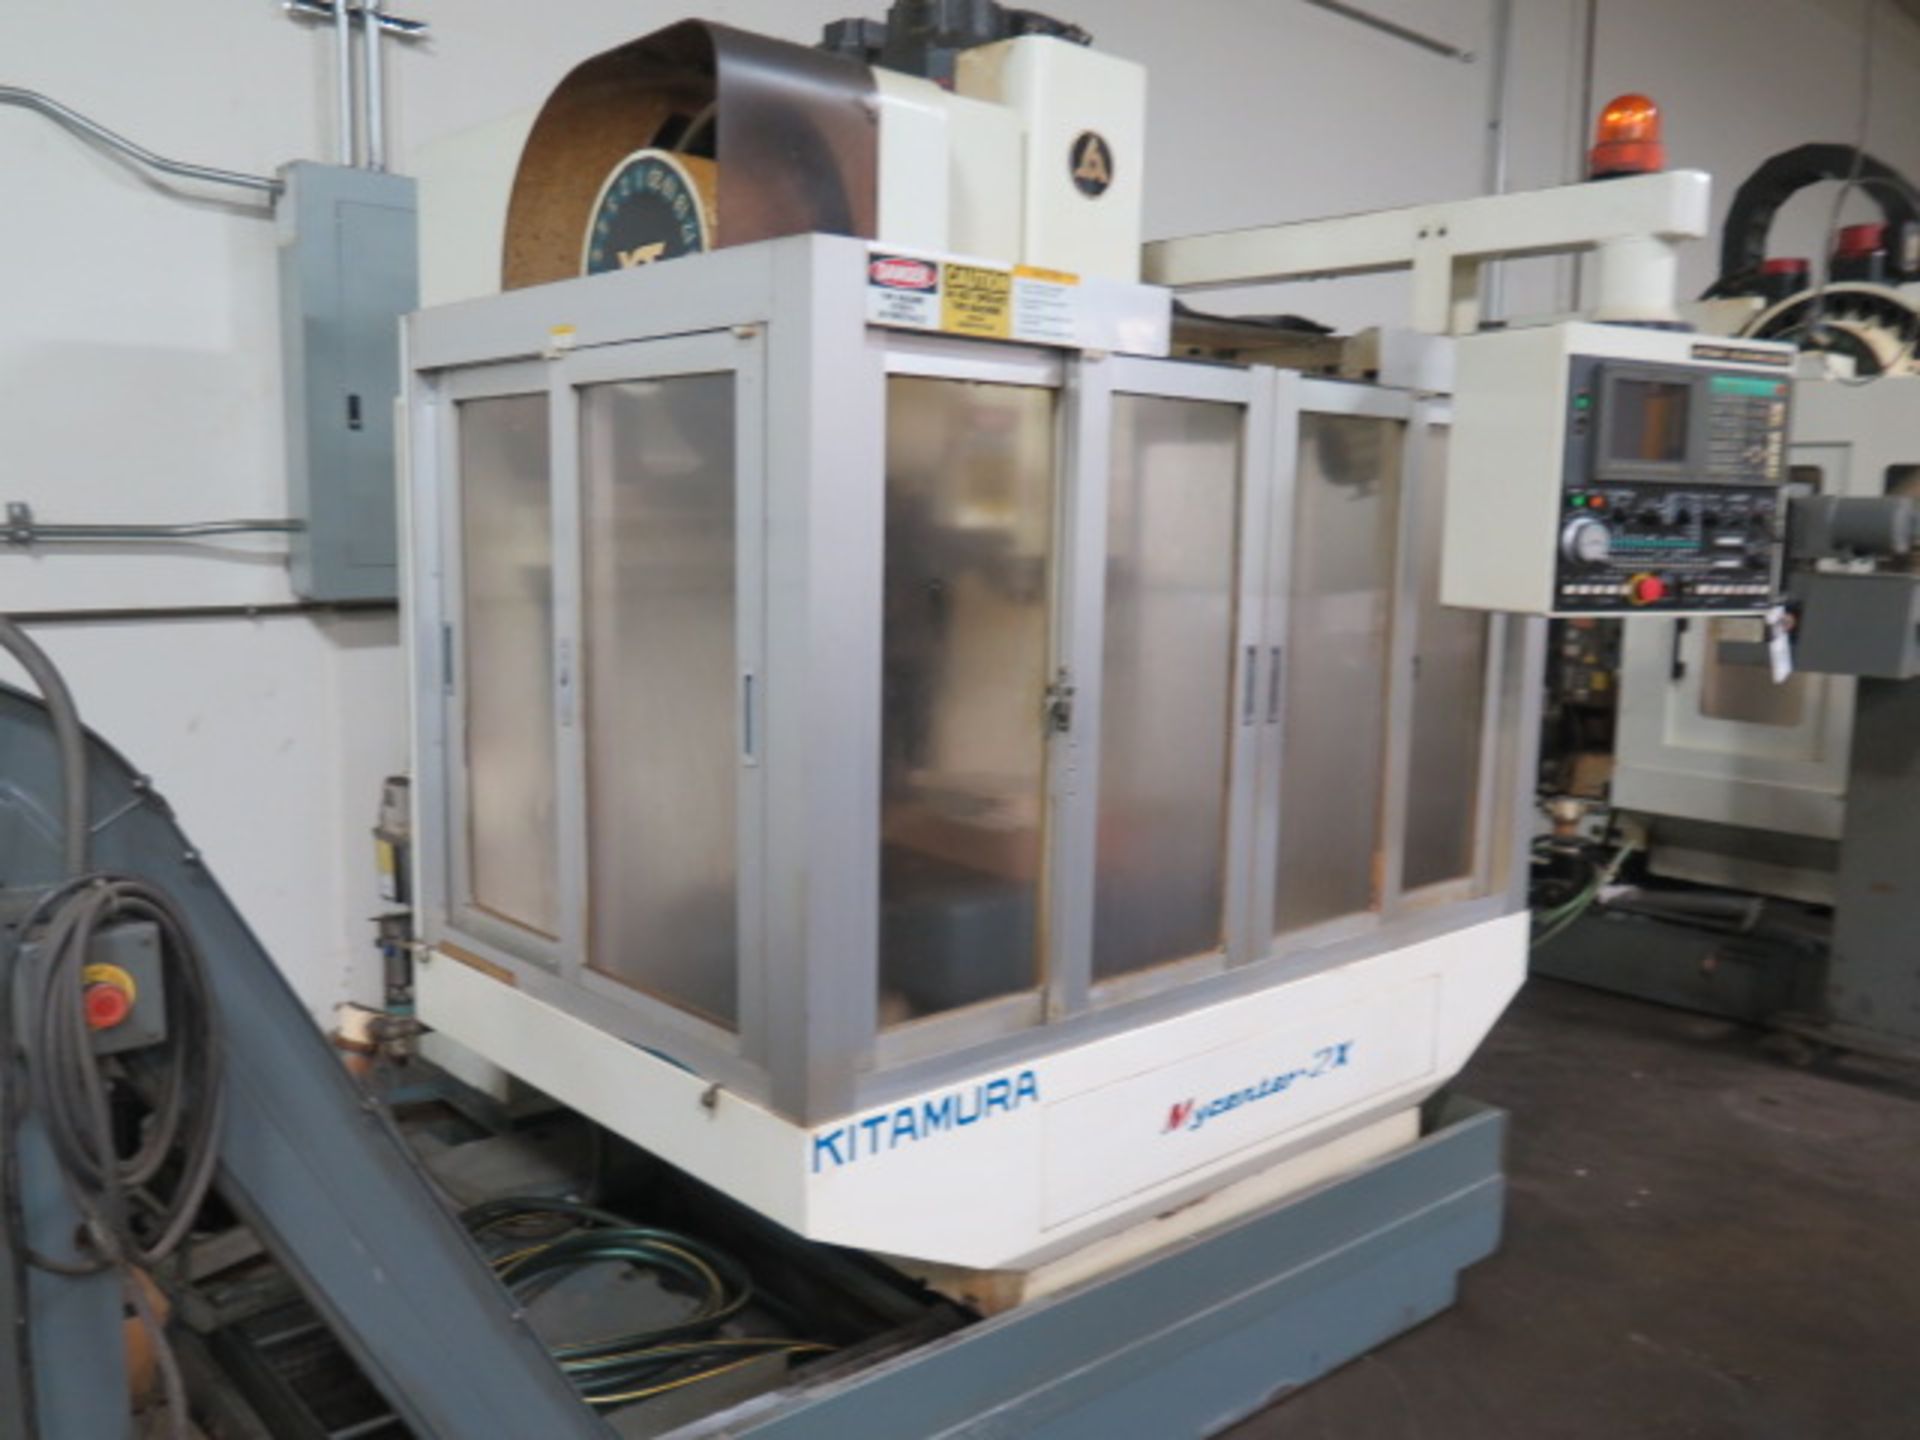 1998 Kitamura Mycenter-2X CNC VMC s/n 07120 w/ Yasnac i80 Controls, 20-Station, SOLD AS IS - Image 3 of 23